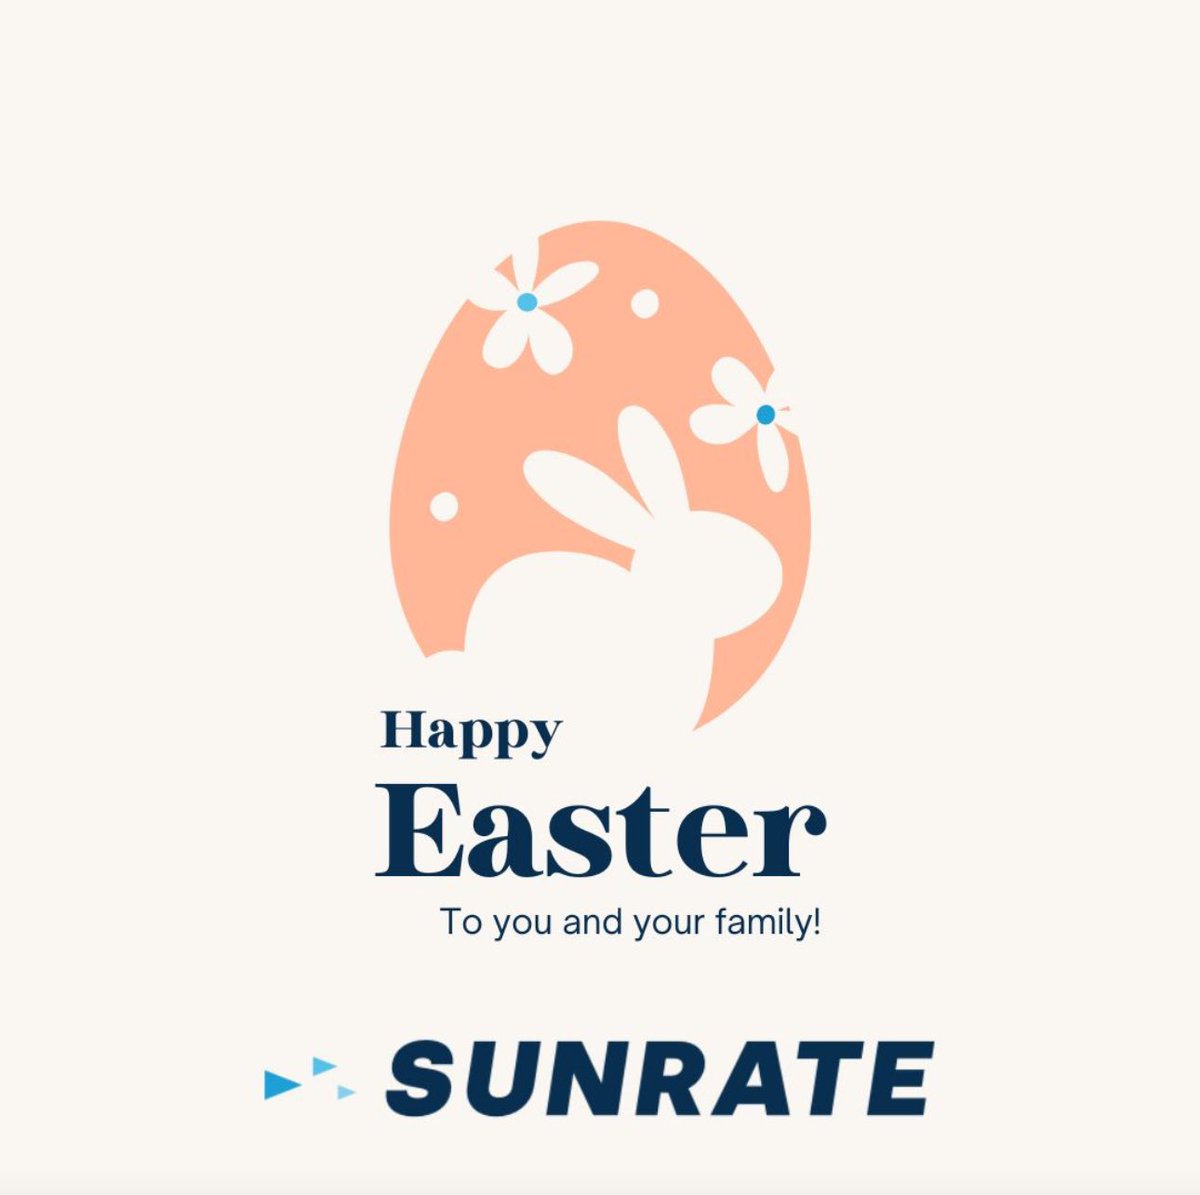 From all of us at SUNRATE, Happy Easter! May your day be filled with blessings, love and joy!